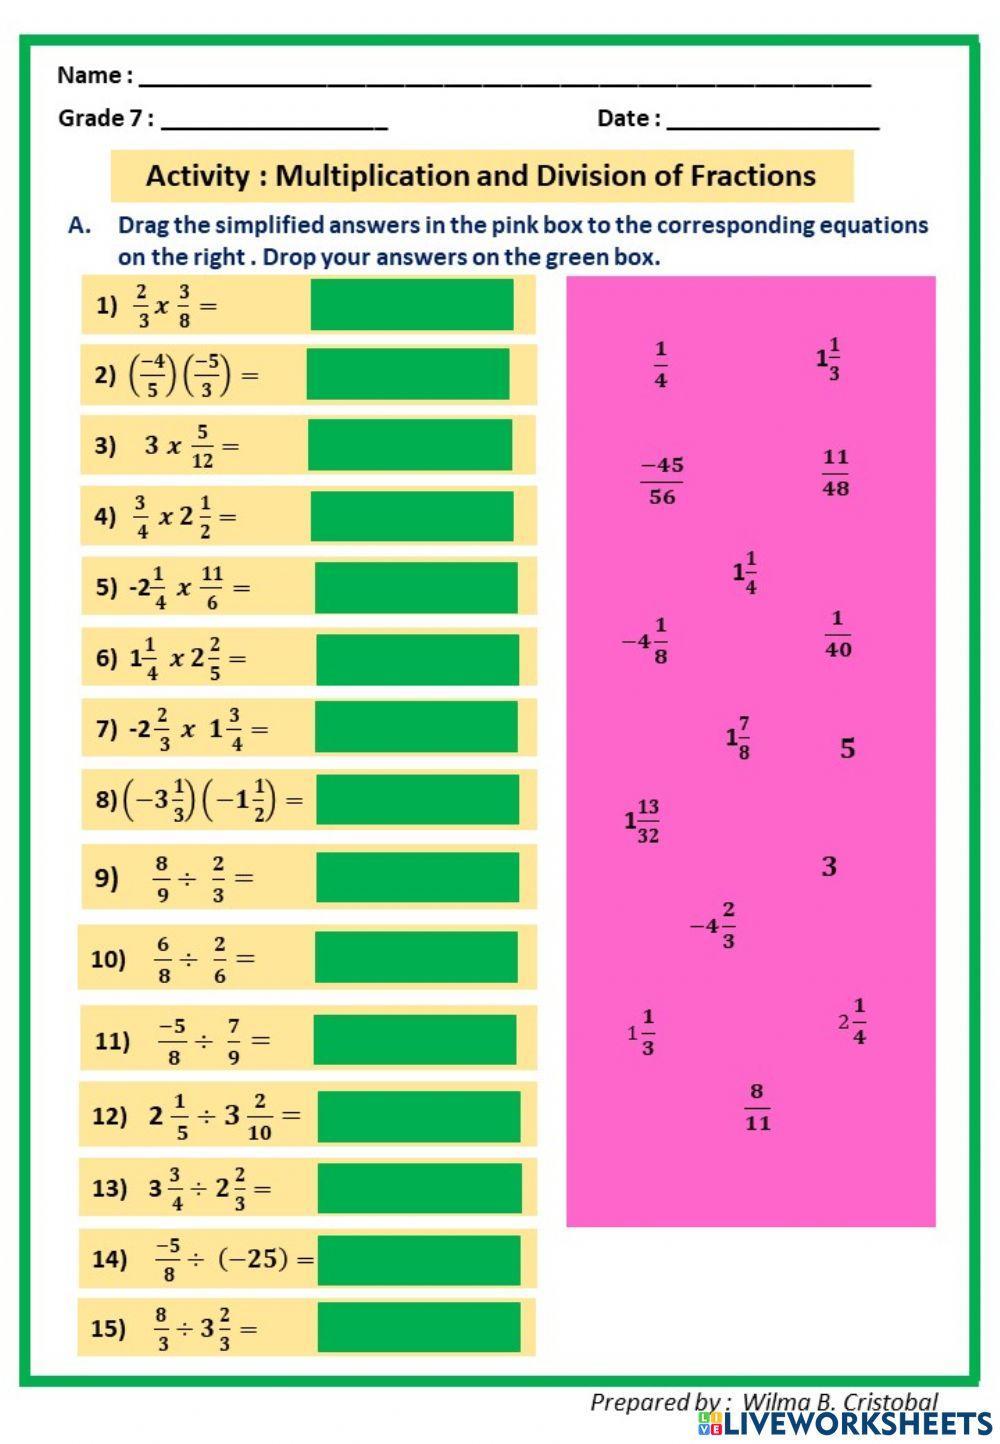 MULTIPLICATION AND DIVISION of Fractions